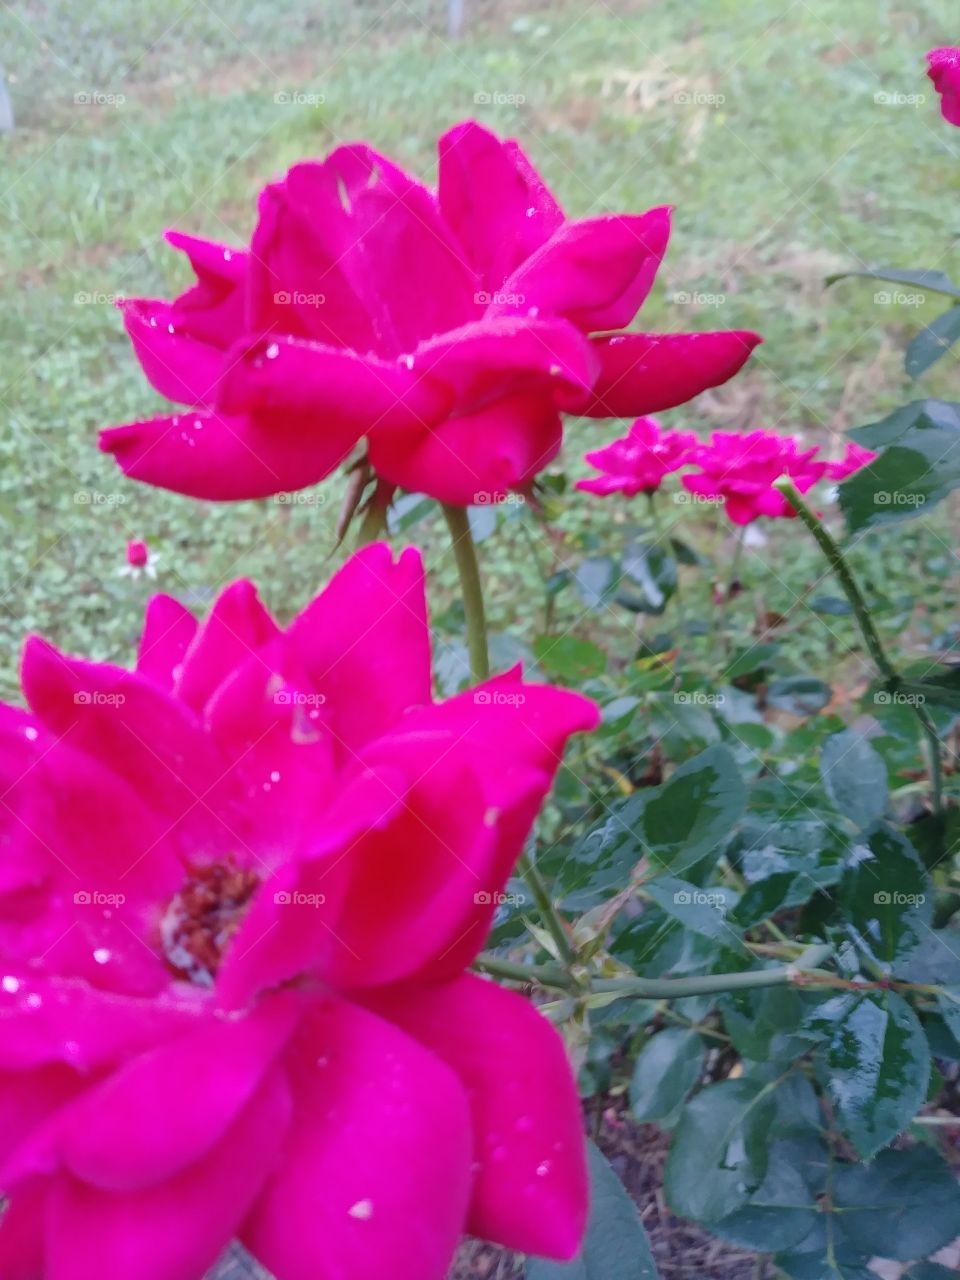 raindrops on a rose